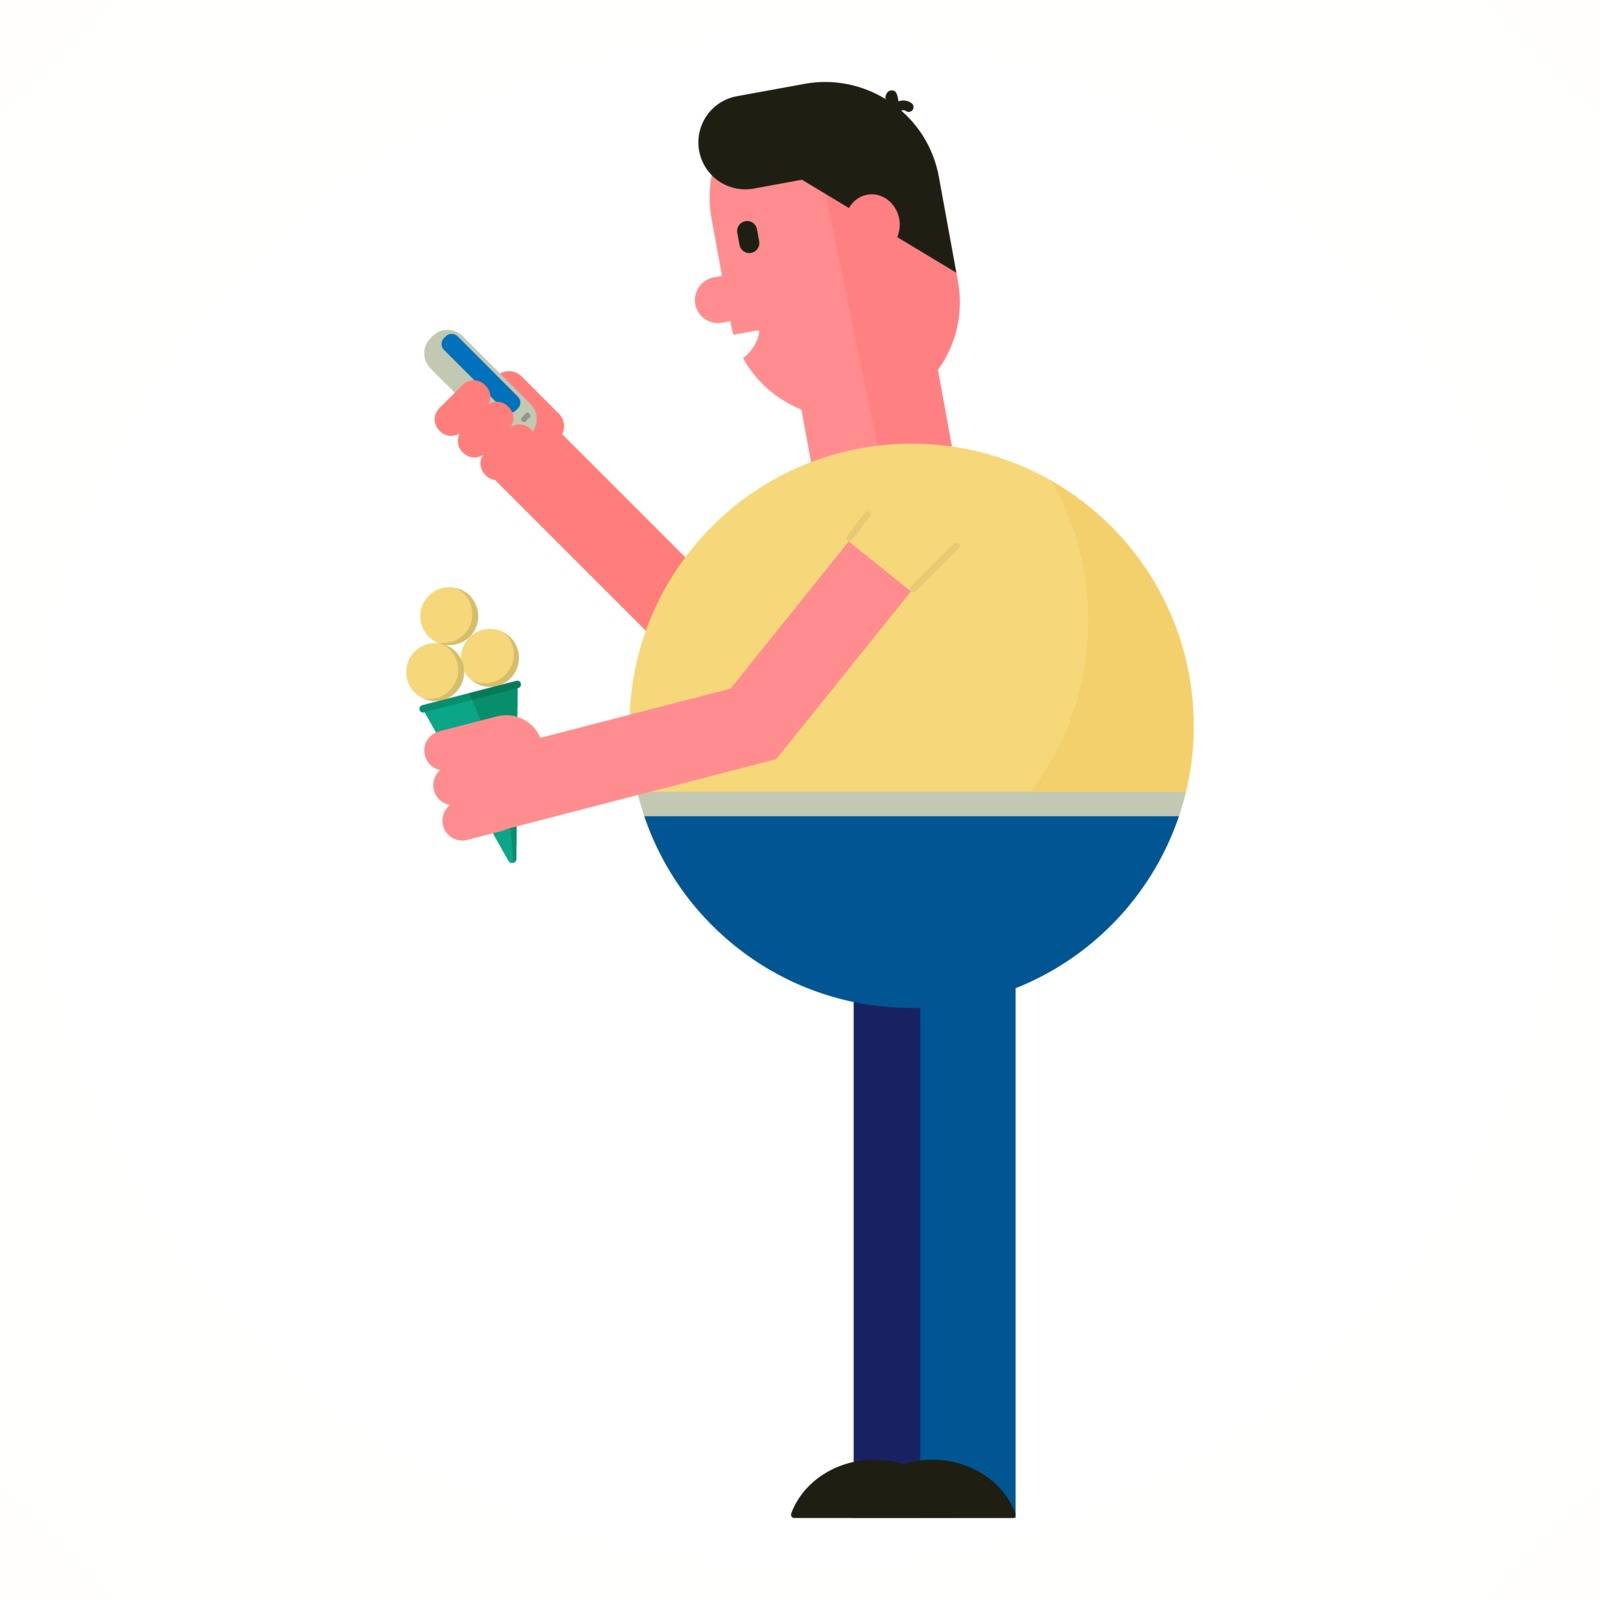 Vector illustration of a man with ice cream and mobile phone by helllbilly